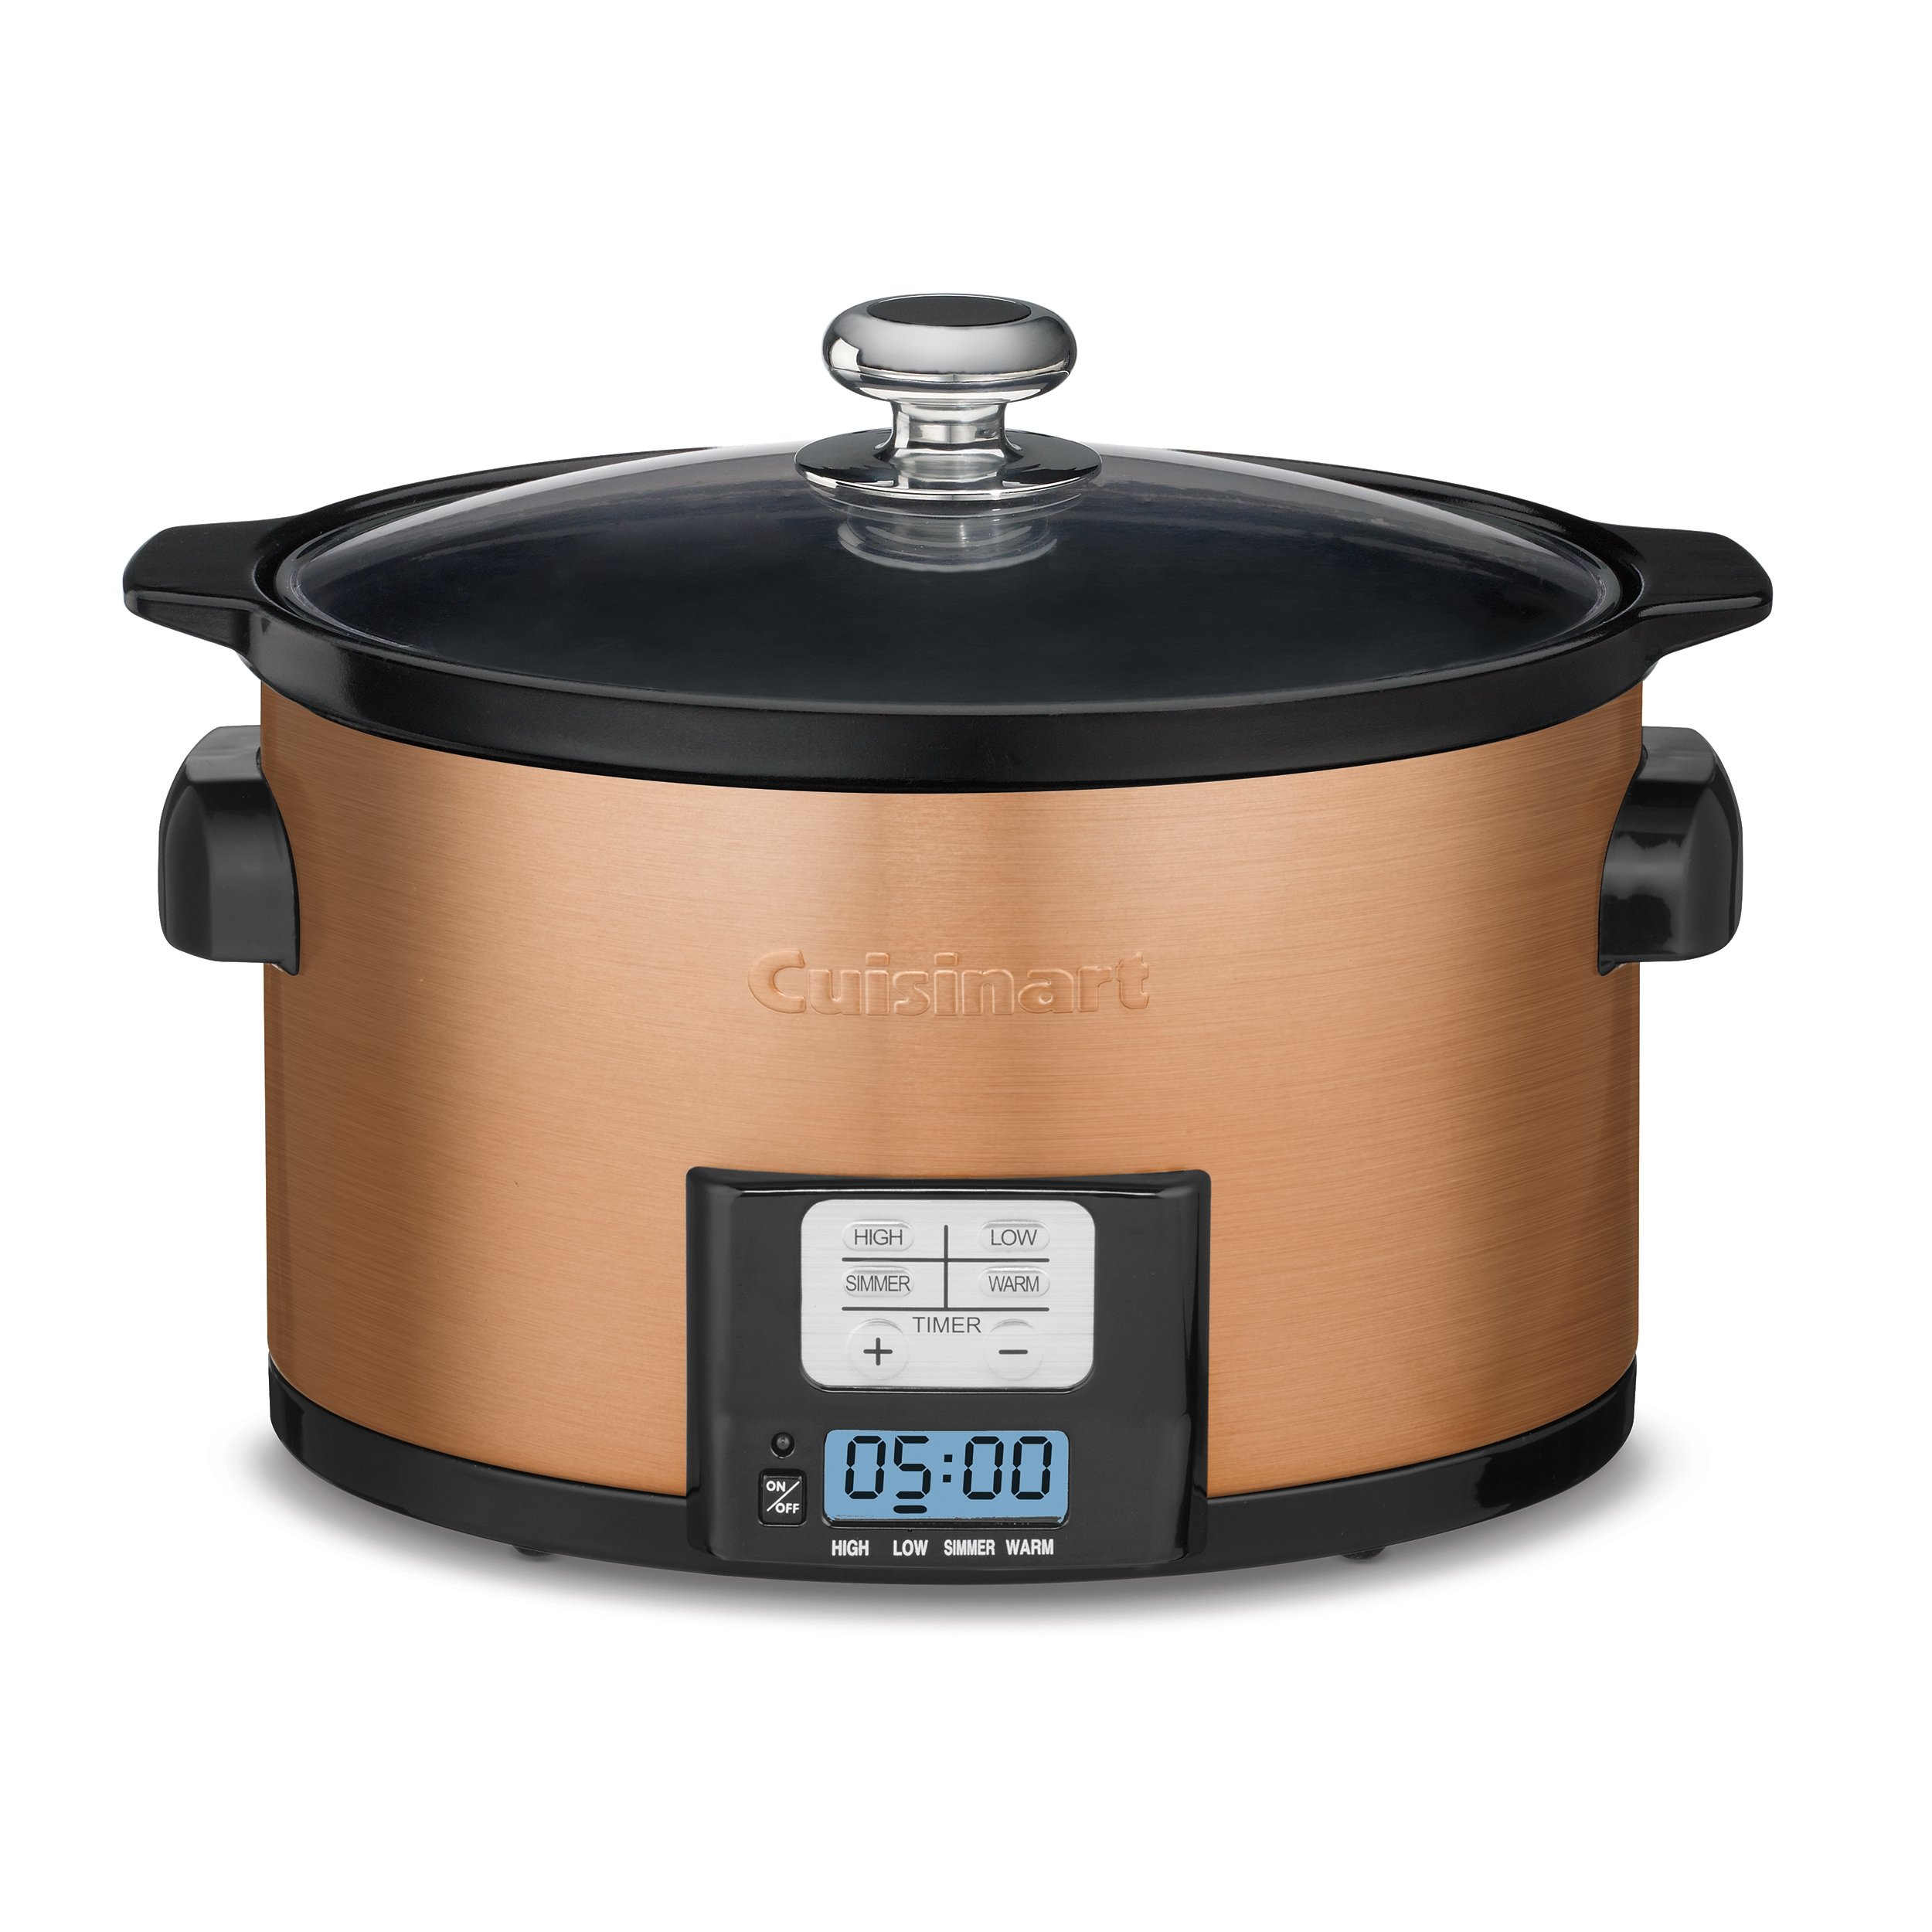 Discontinued 3.5 Quart Programmable Slow Cooker